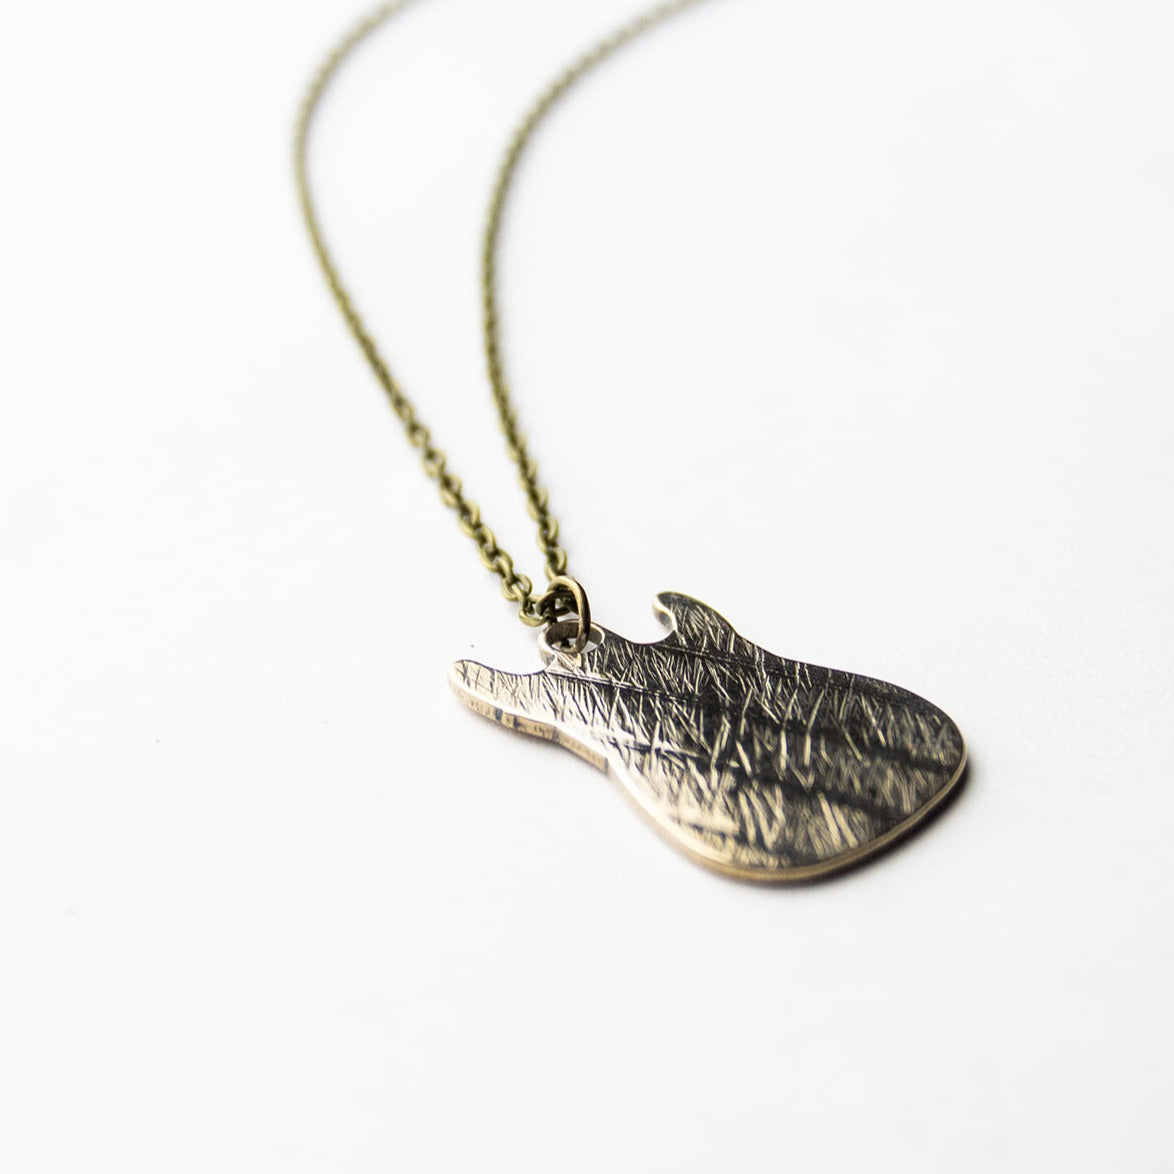 Strat - Reclaimed Cymbal Necklace